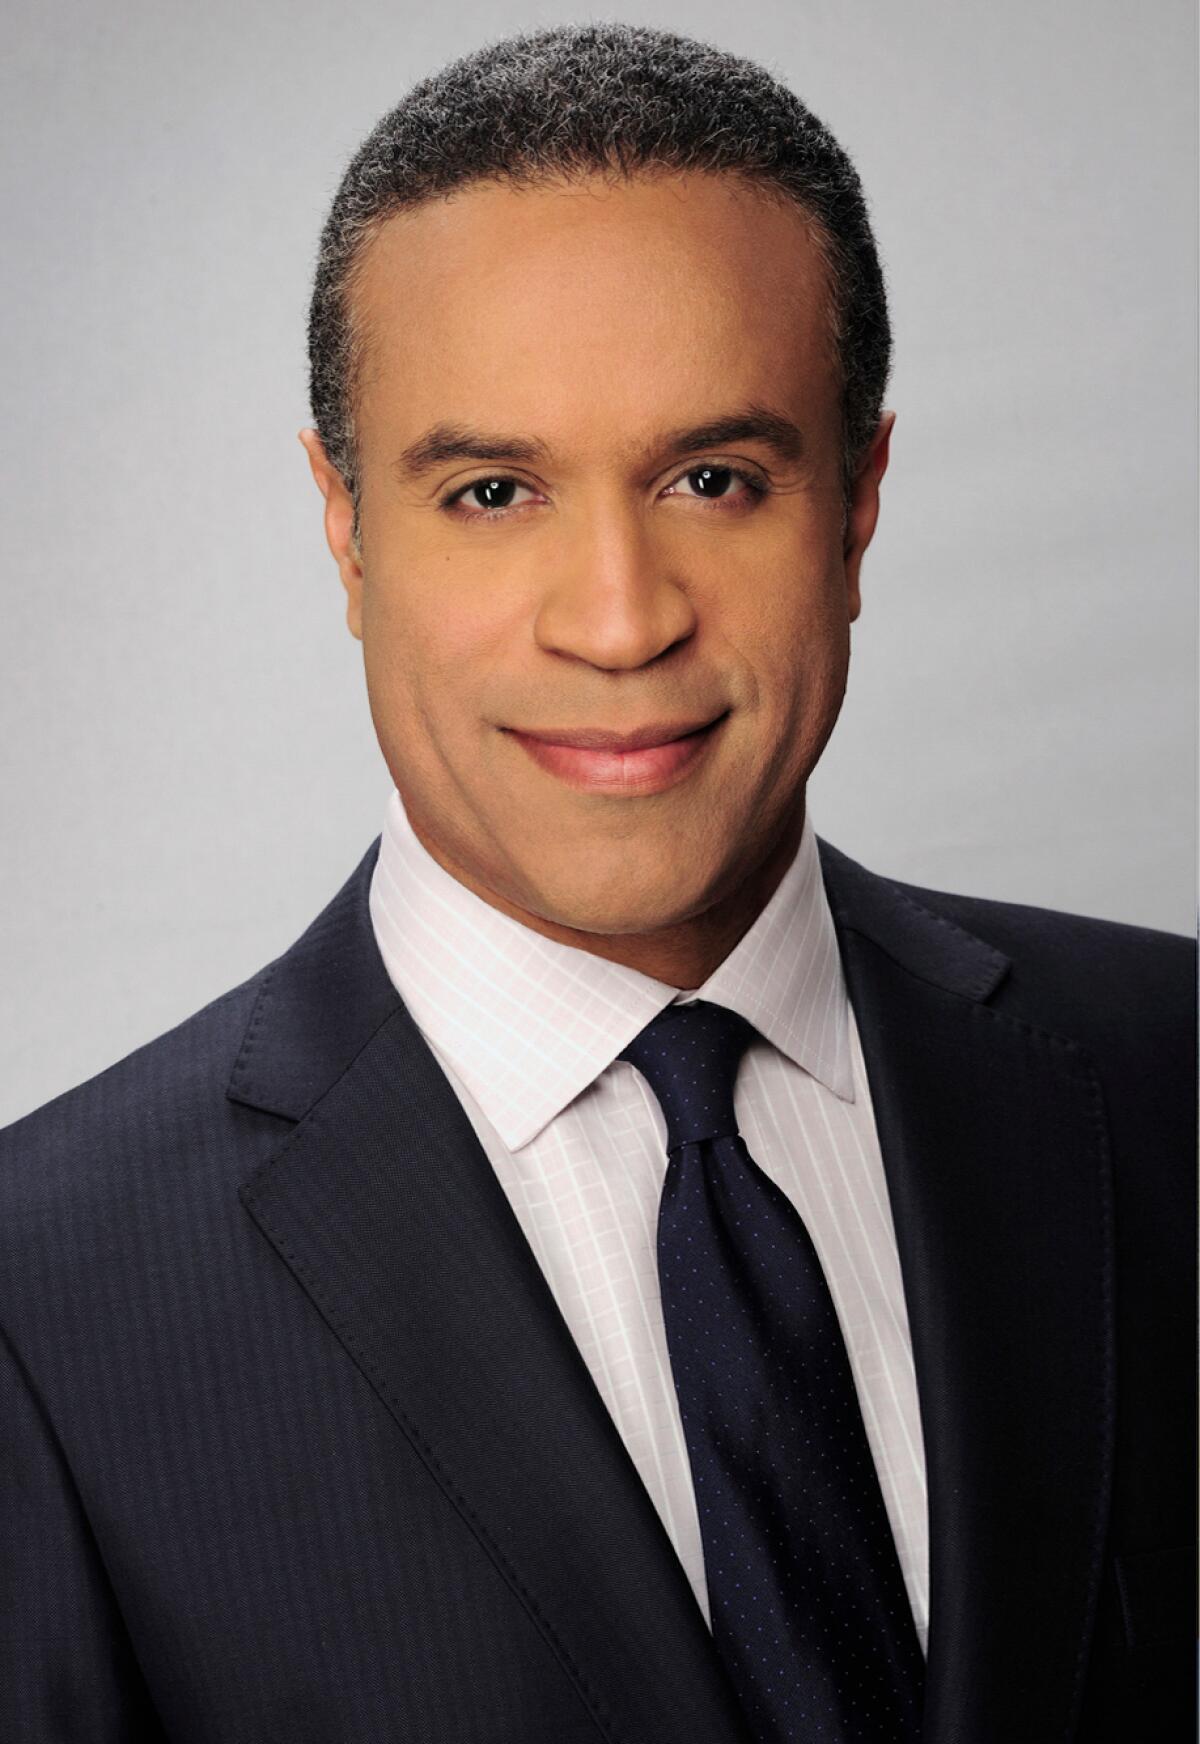 Maurice DuBois will anchor the "CBS Evening News" with John Dickerson.